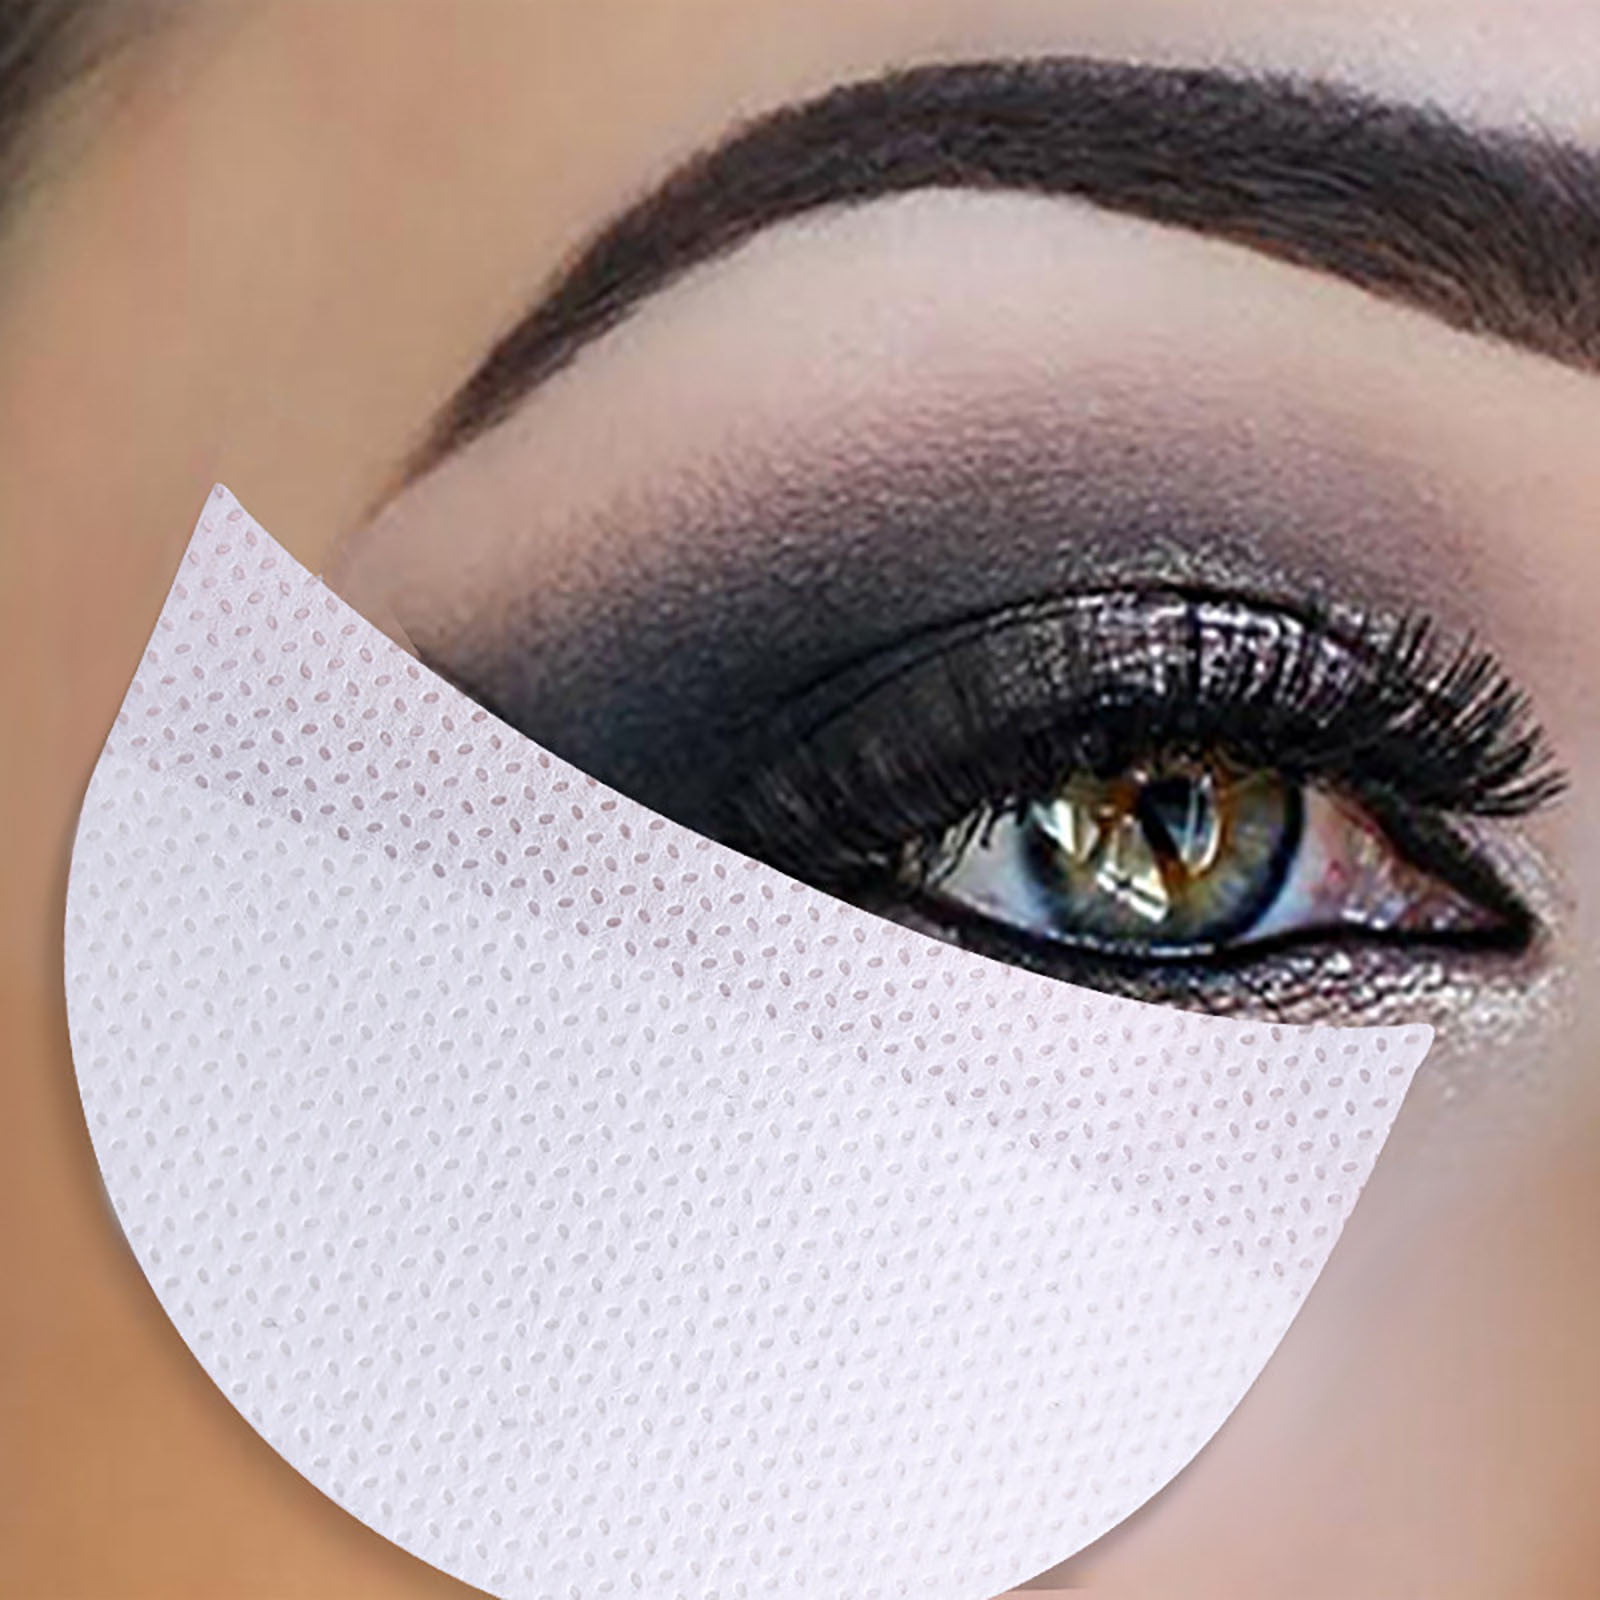  Mipcase 2pcs Roll Eye Makeup Tape for Eye Shadows Eyelash  Stencils Adhesive Tape Lash Tape Cosmetic Paper Tape K Tape Eyeshadow Tape  Double Eyelid Sticker Extension Band Not Reflective : Beauty